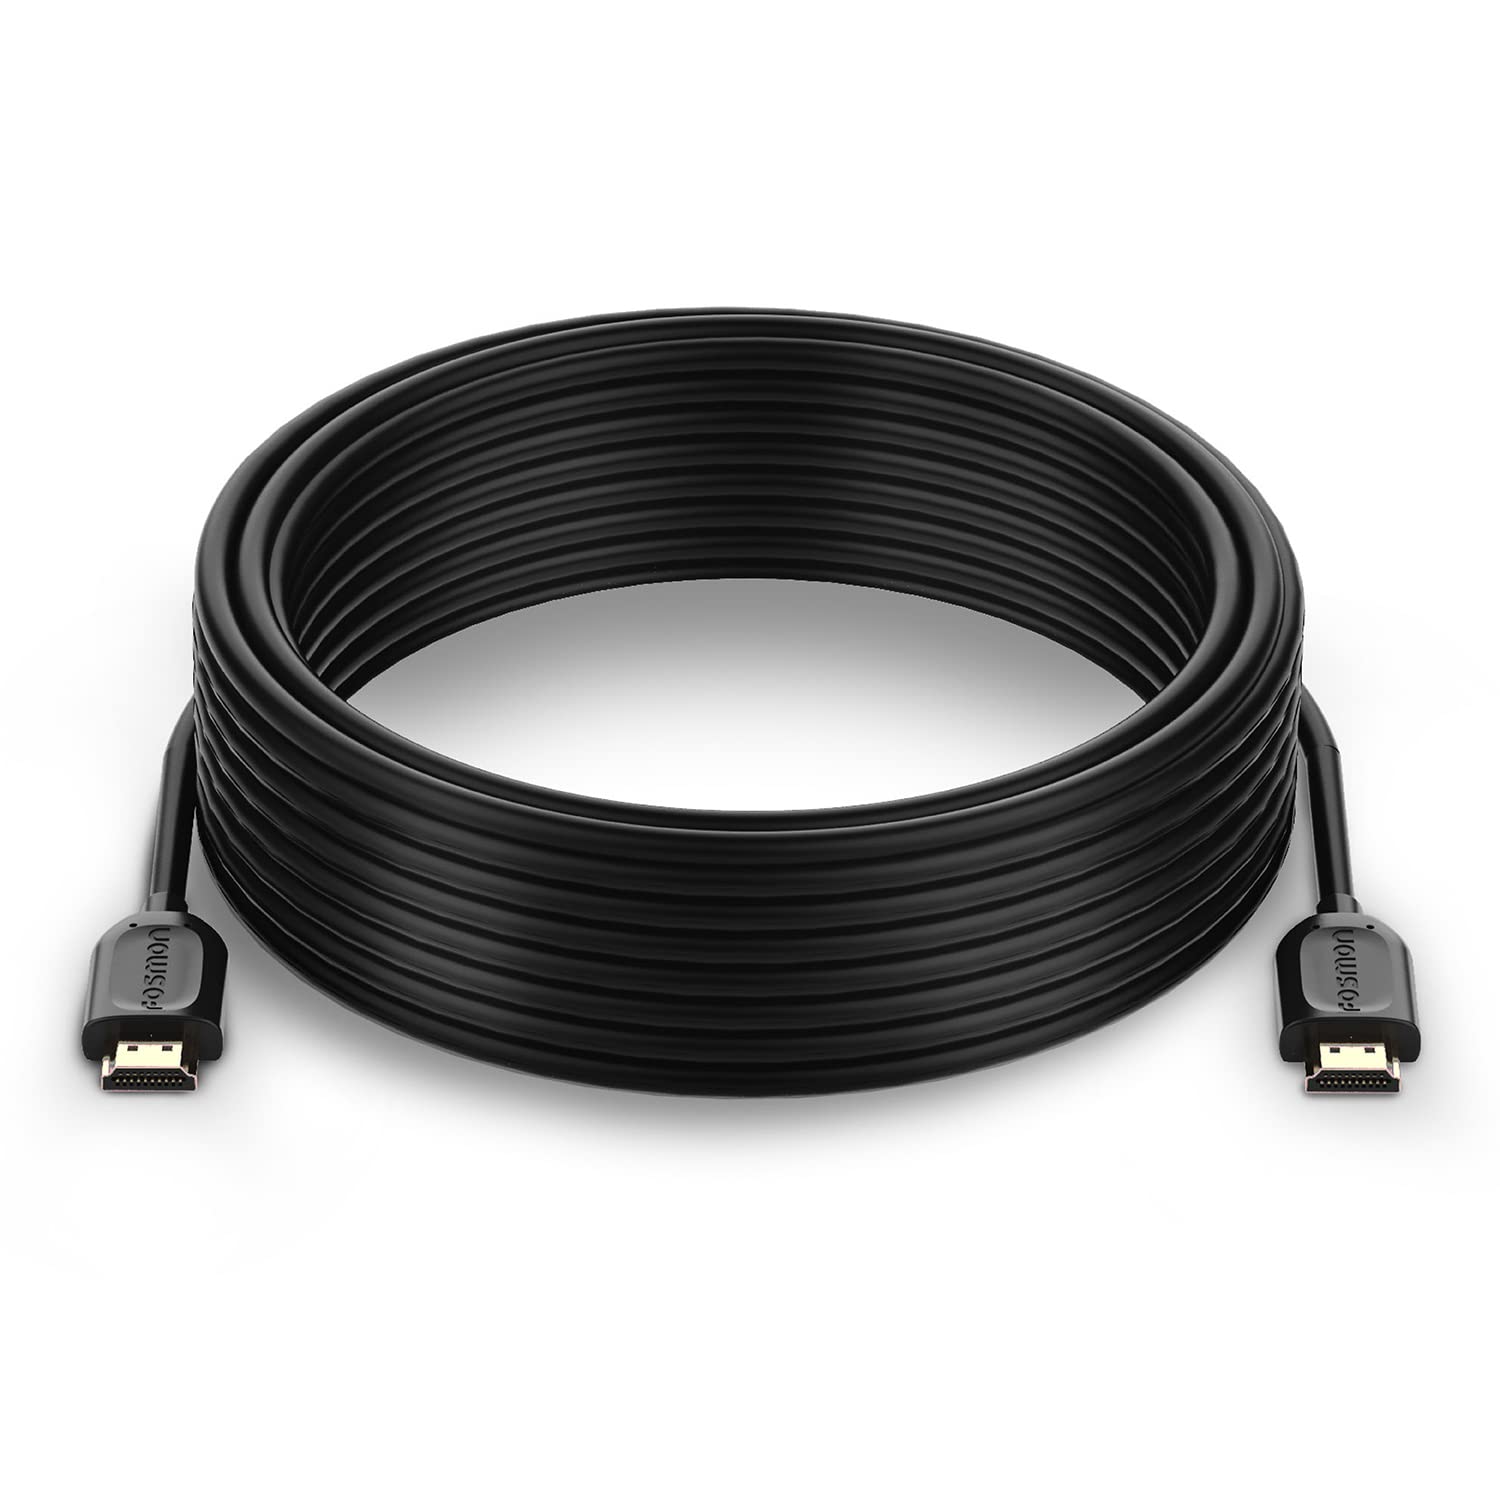  9. Fosmon 4K HDMI Cable 25 FT 